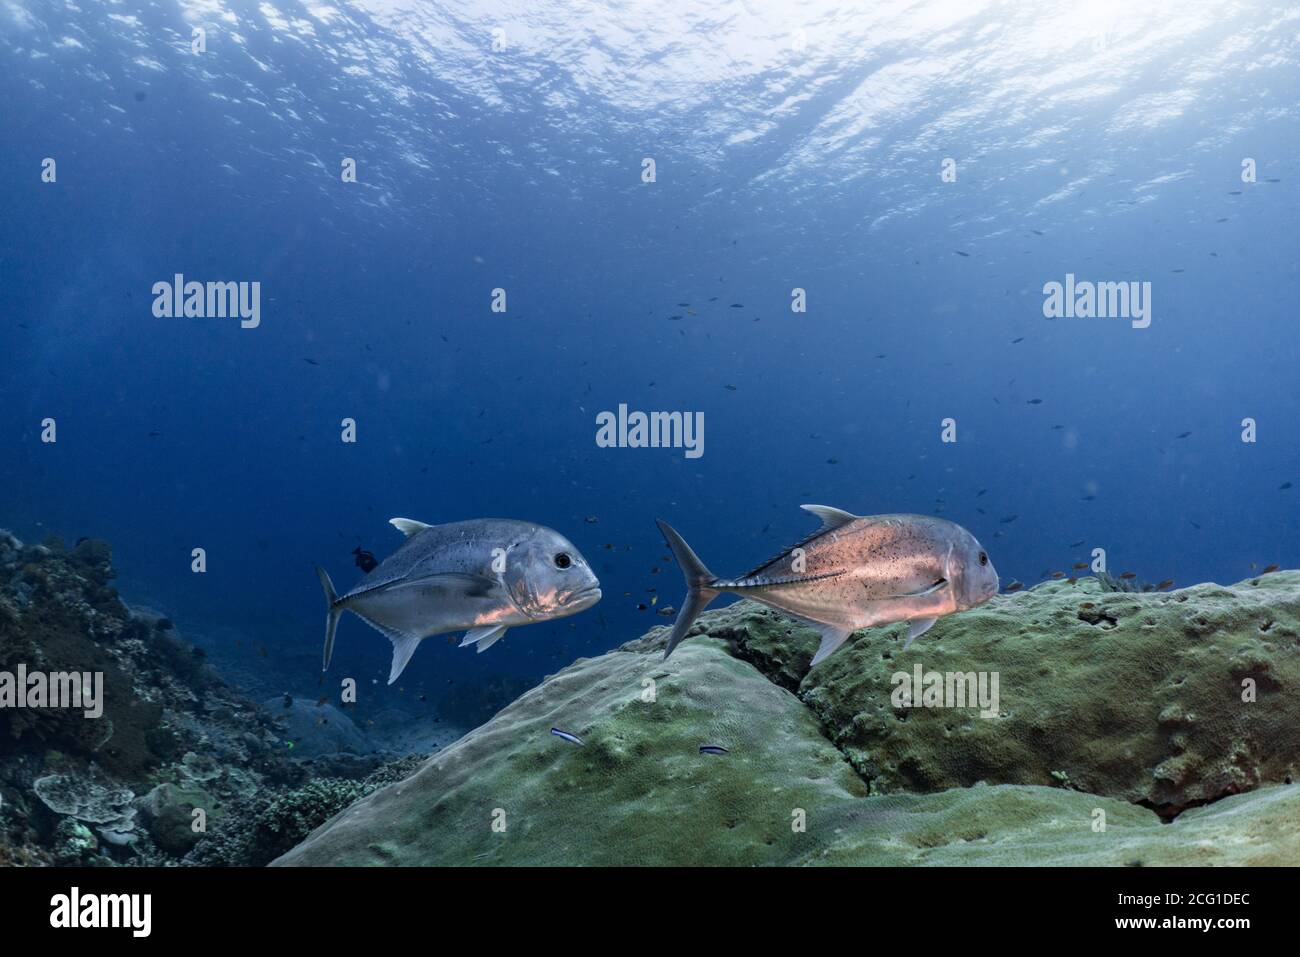 Jack fish on a coral reef Stock Photo